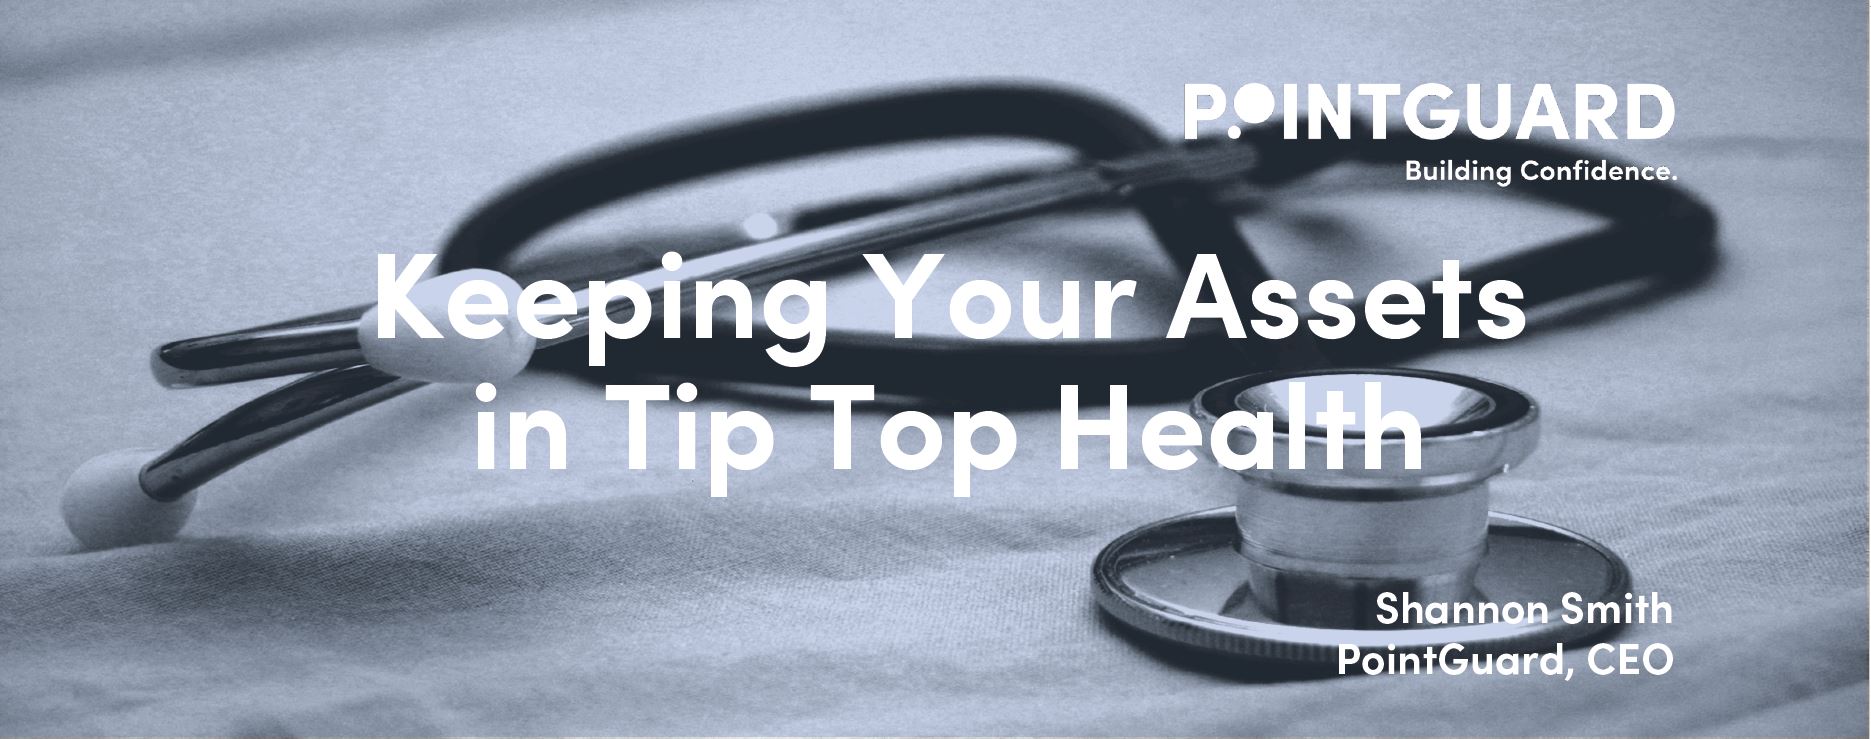 Keeping Your Assets in Tip Top Health